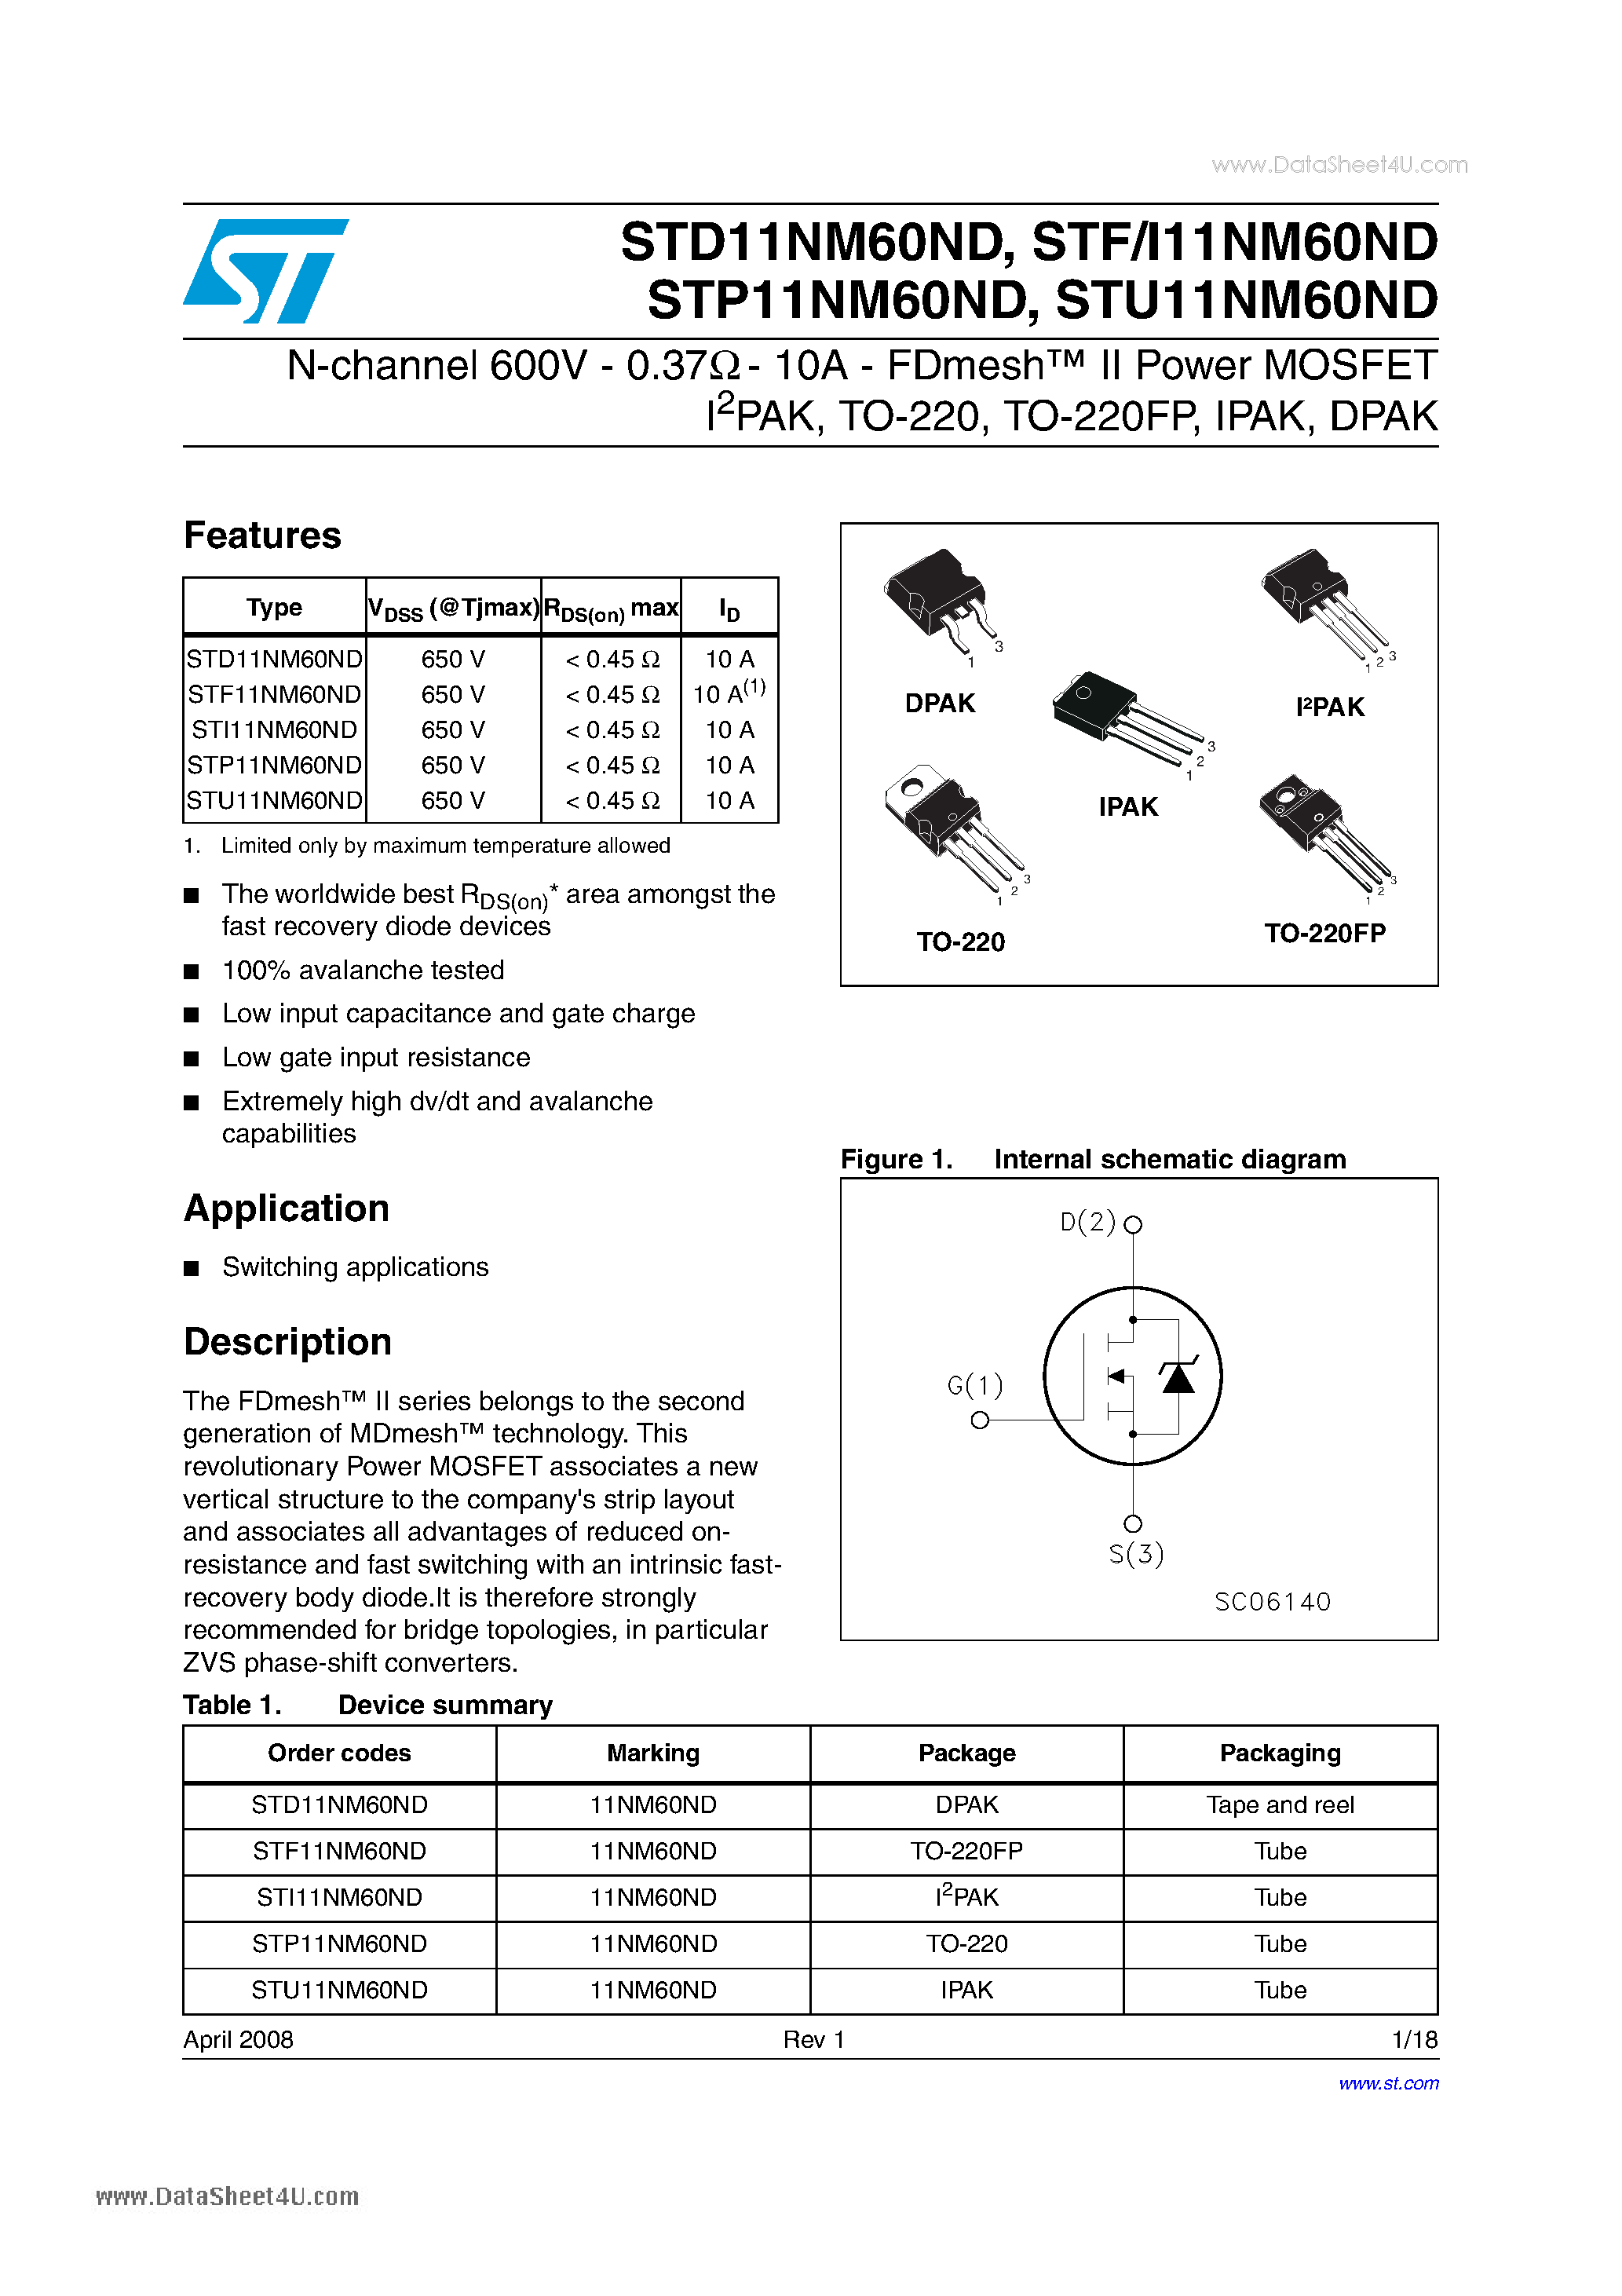 Datasheet STP11NM60ND - Power MOSFET page 1